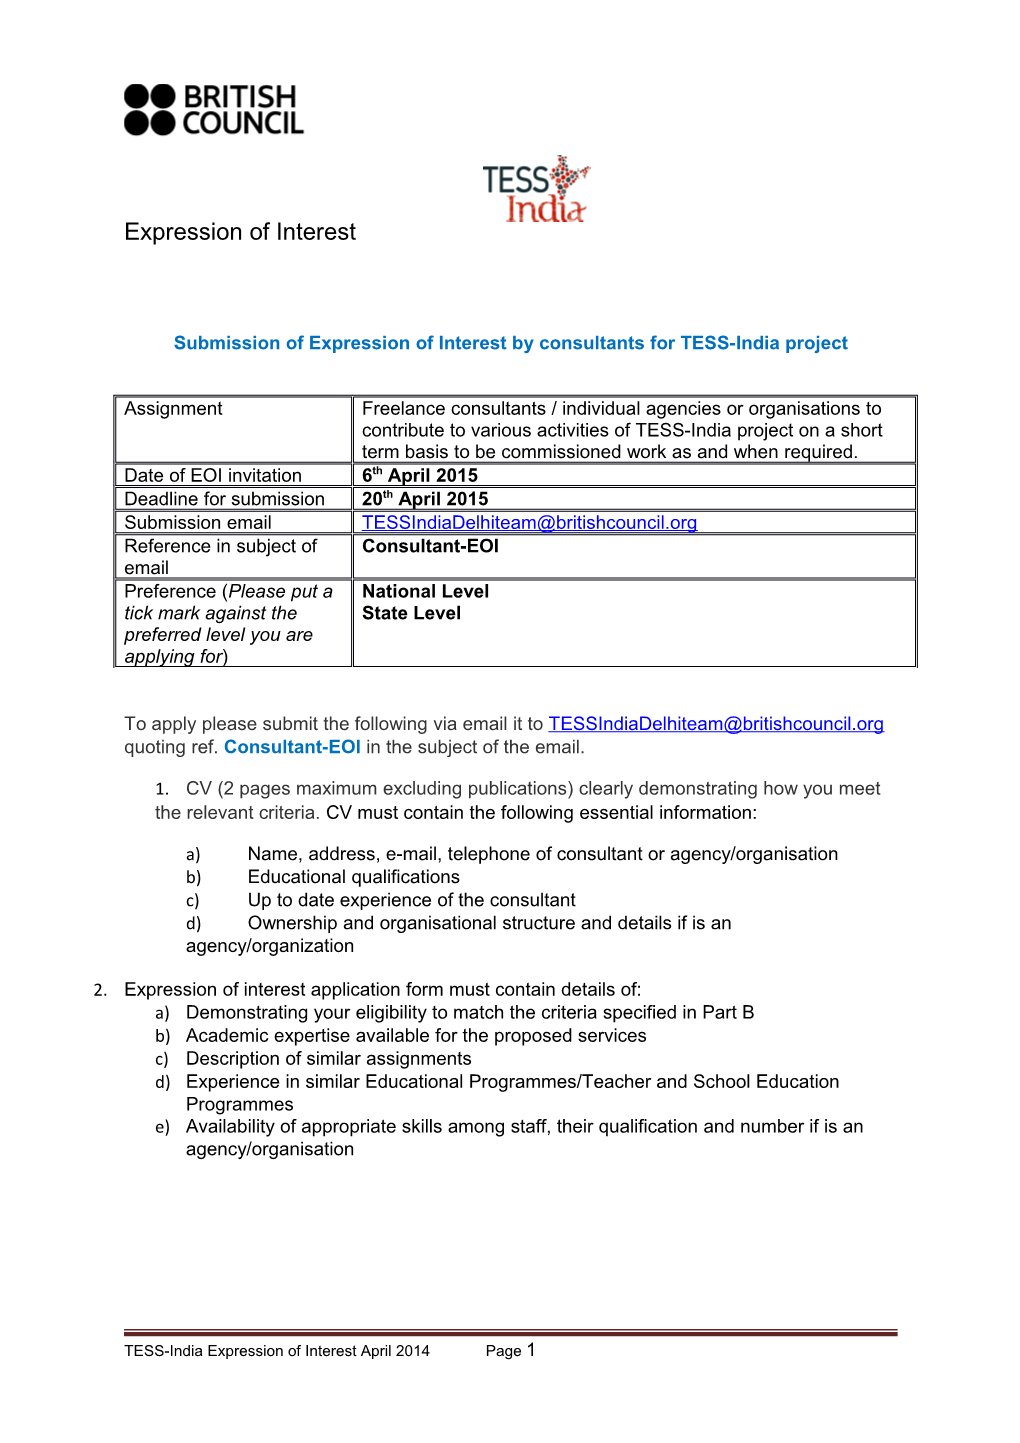 Submission of Expression of Interest by Consultants for TESS-India Project